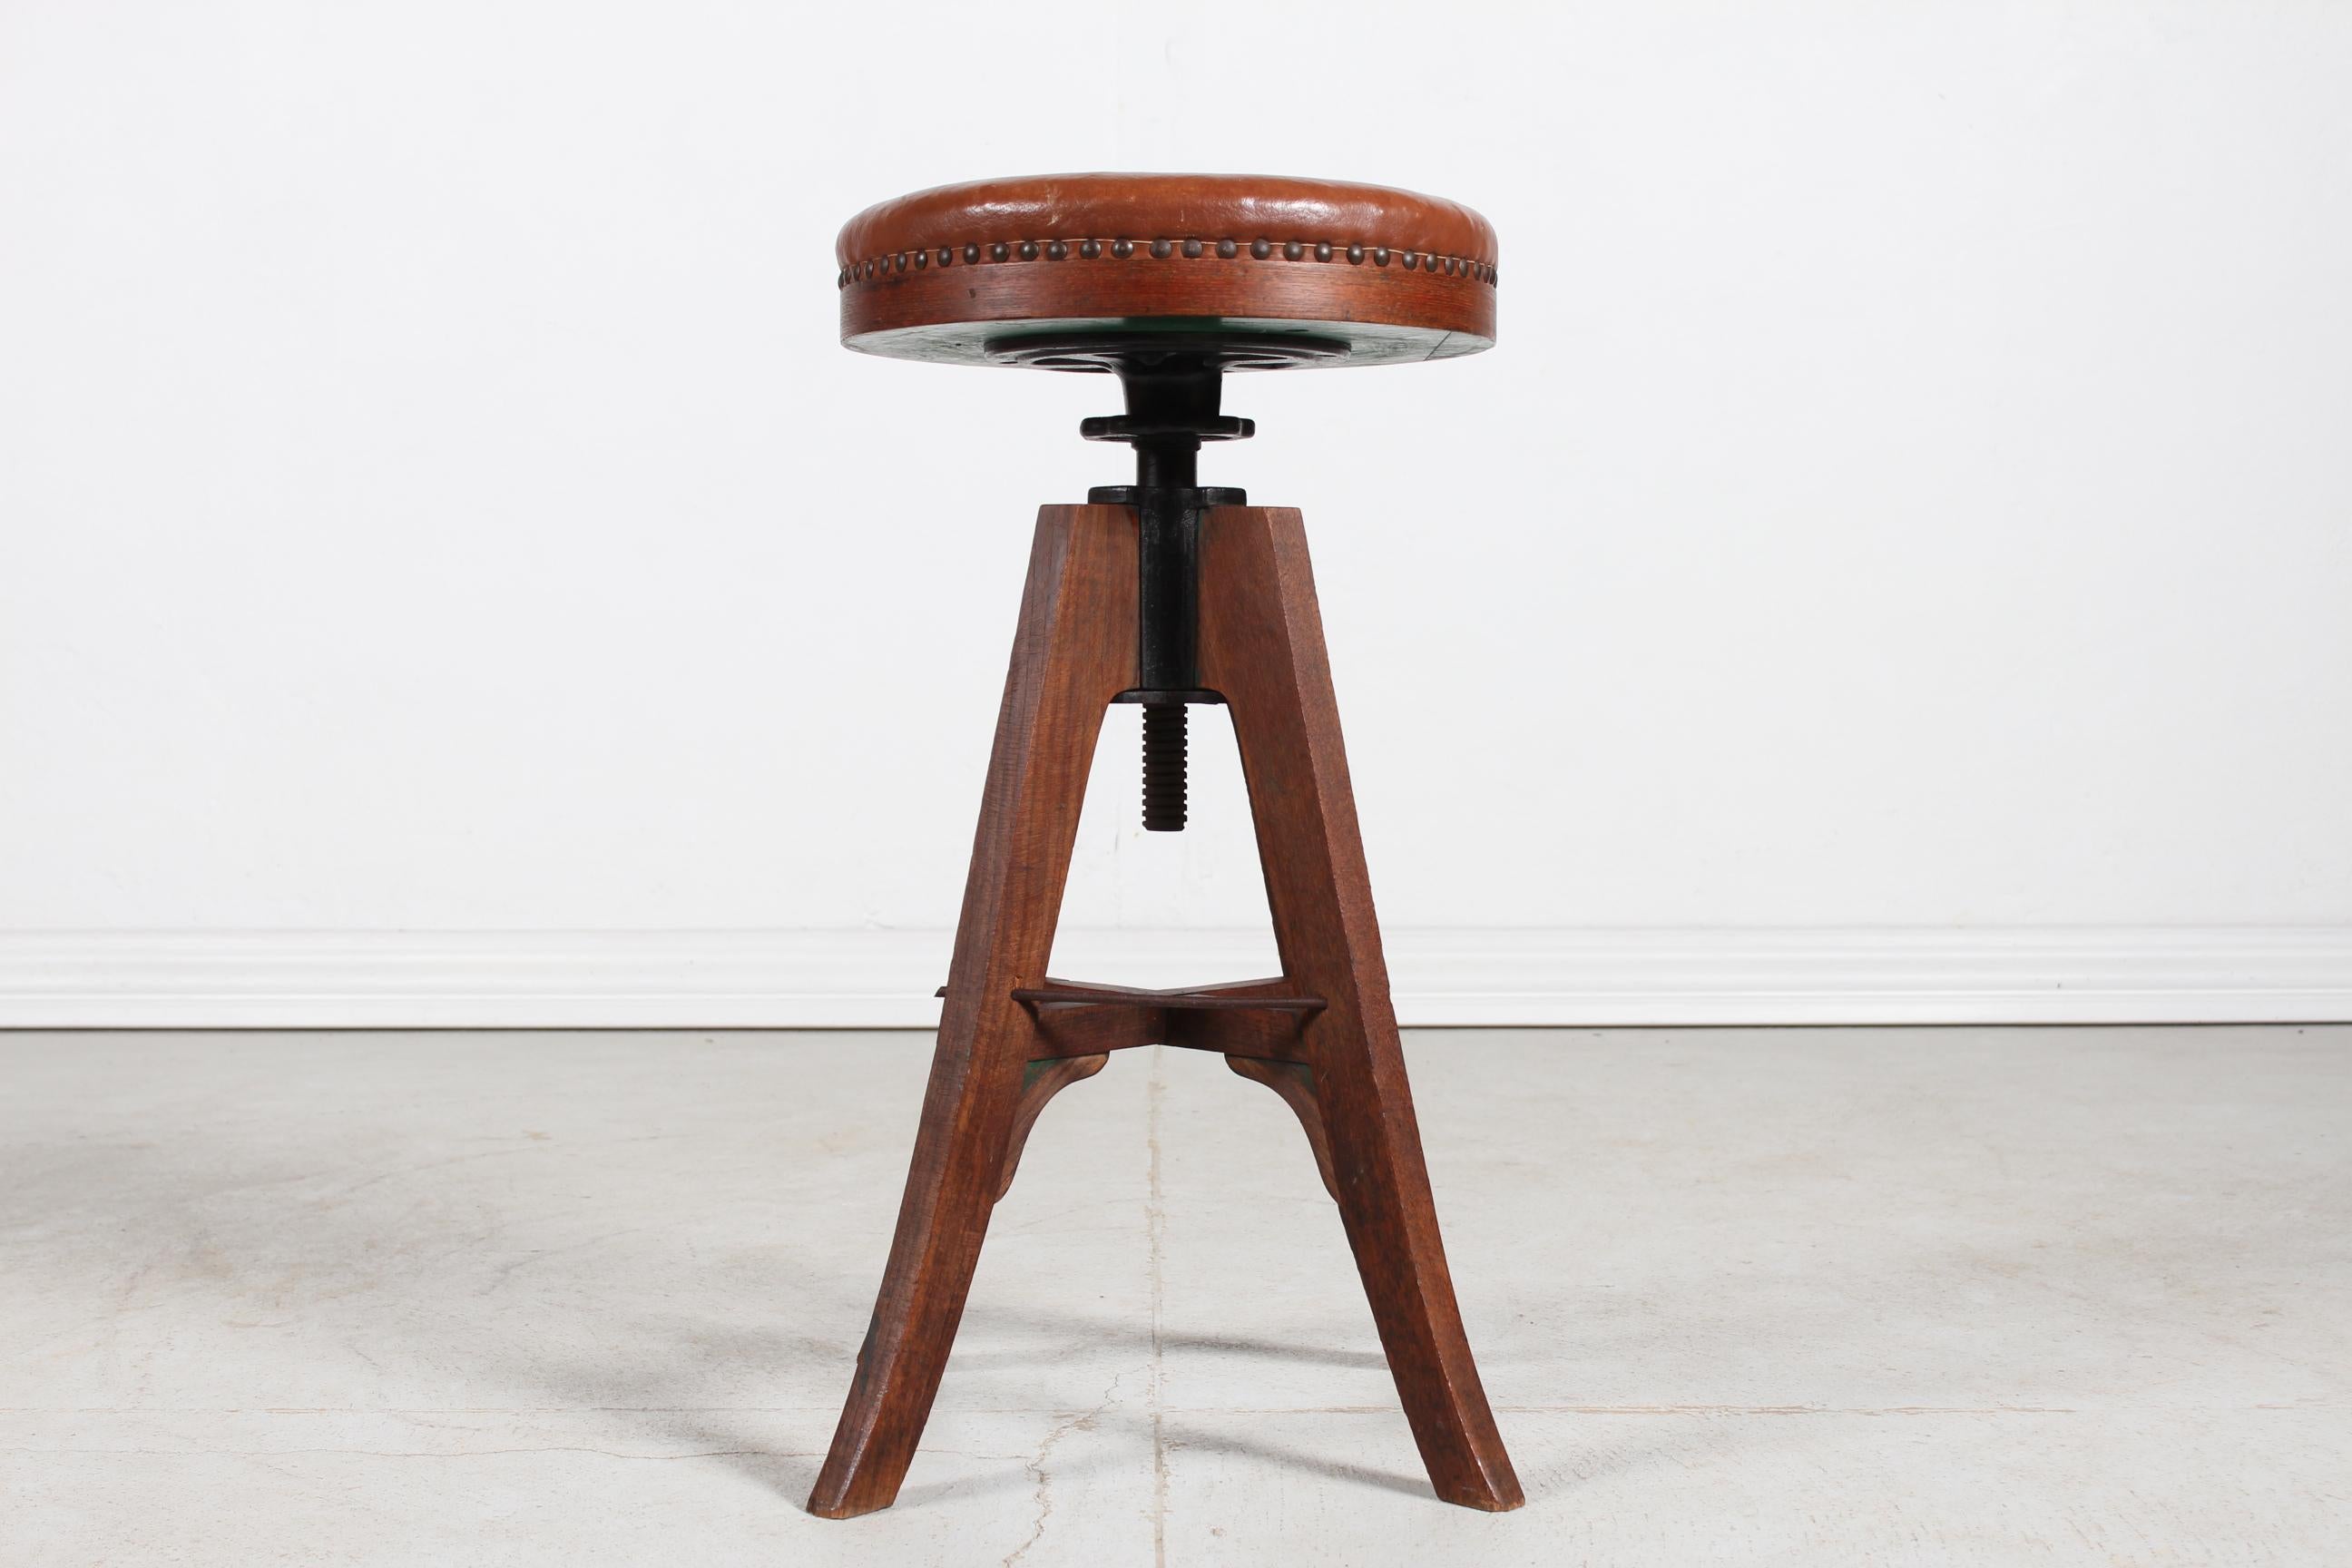 Danish tripod adjustable bar stool/desk stool/swivel stool made of solid oak with round seat mounted with cognac coloured leather with brass nails.
Made ca 1920s by a Danish cabinetmaker (Fritz Hansen)
It's possible to adjust the height of the chair